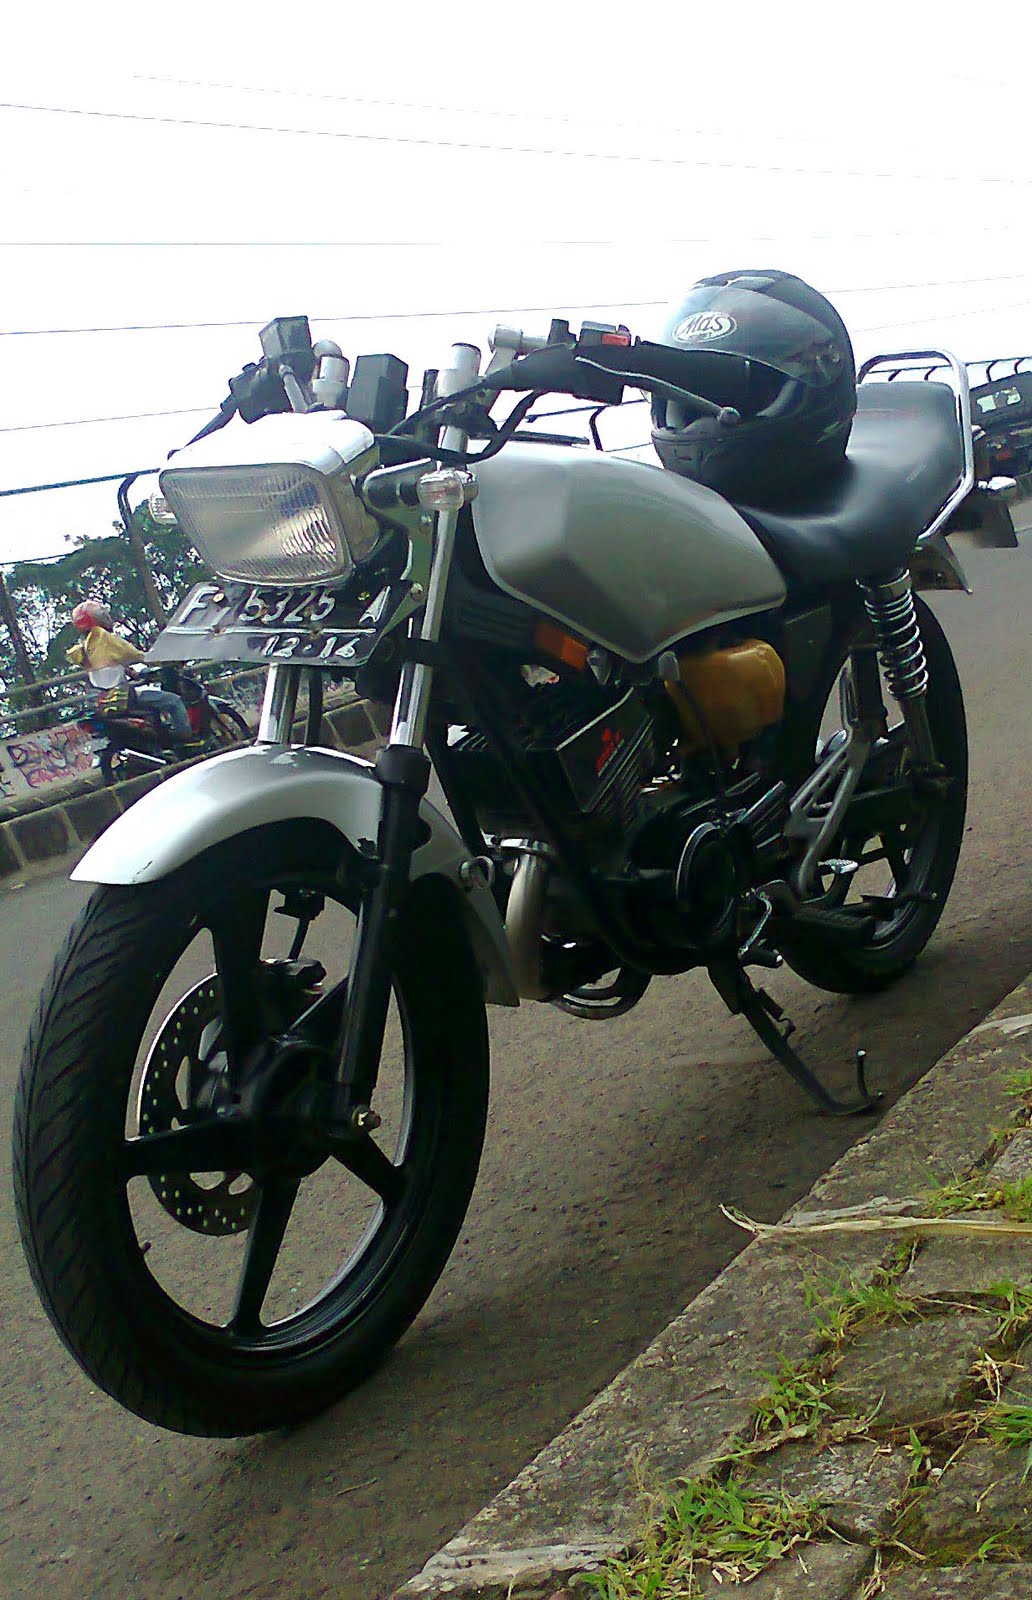 Gallery Pictures MotorBike Yamaha Touch 125